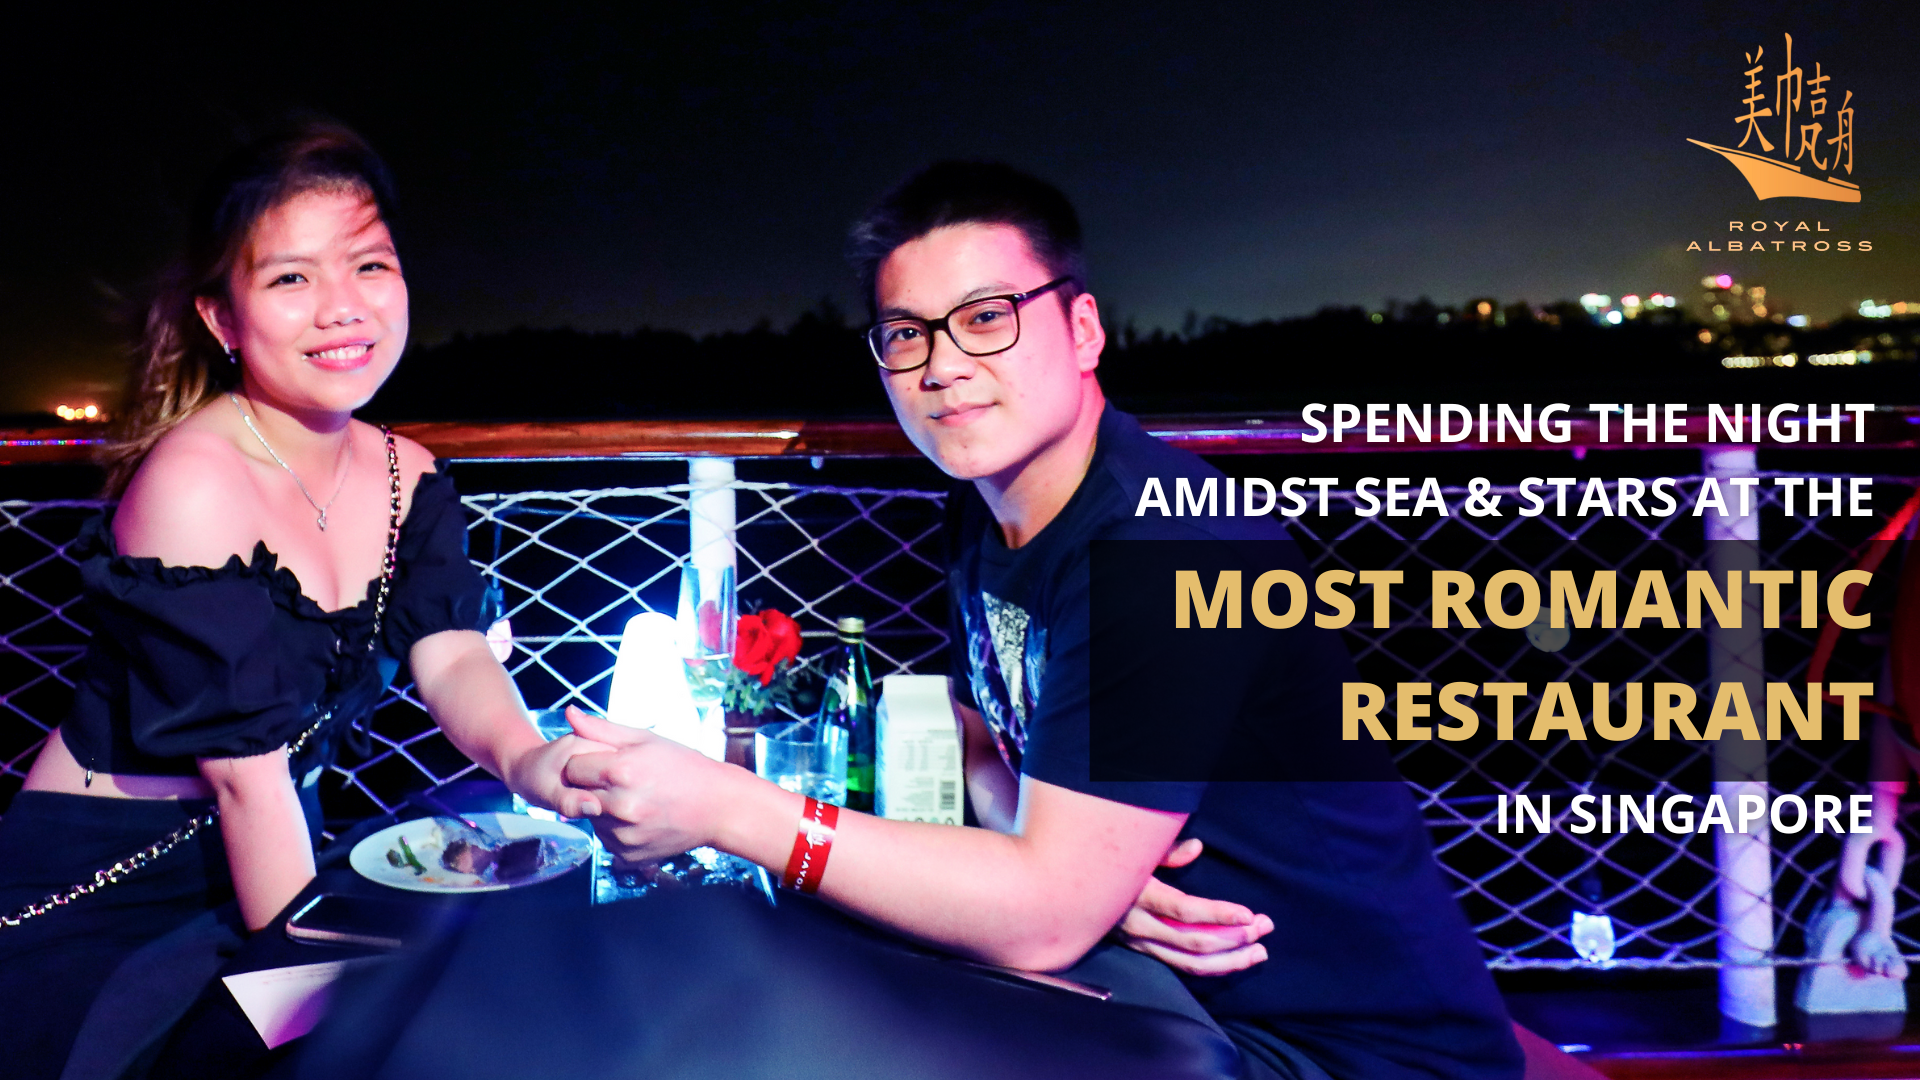 Spending the Night Amidst Sea & Stars at the Most Romantic Restaurant in Singapore | Royal Albatross